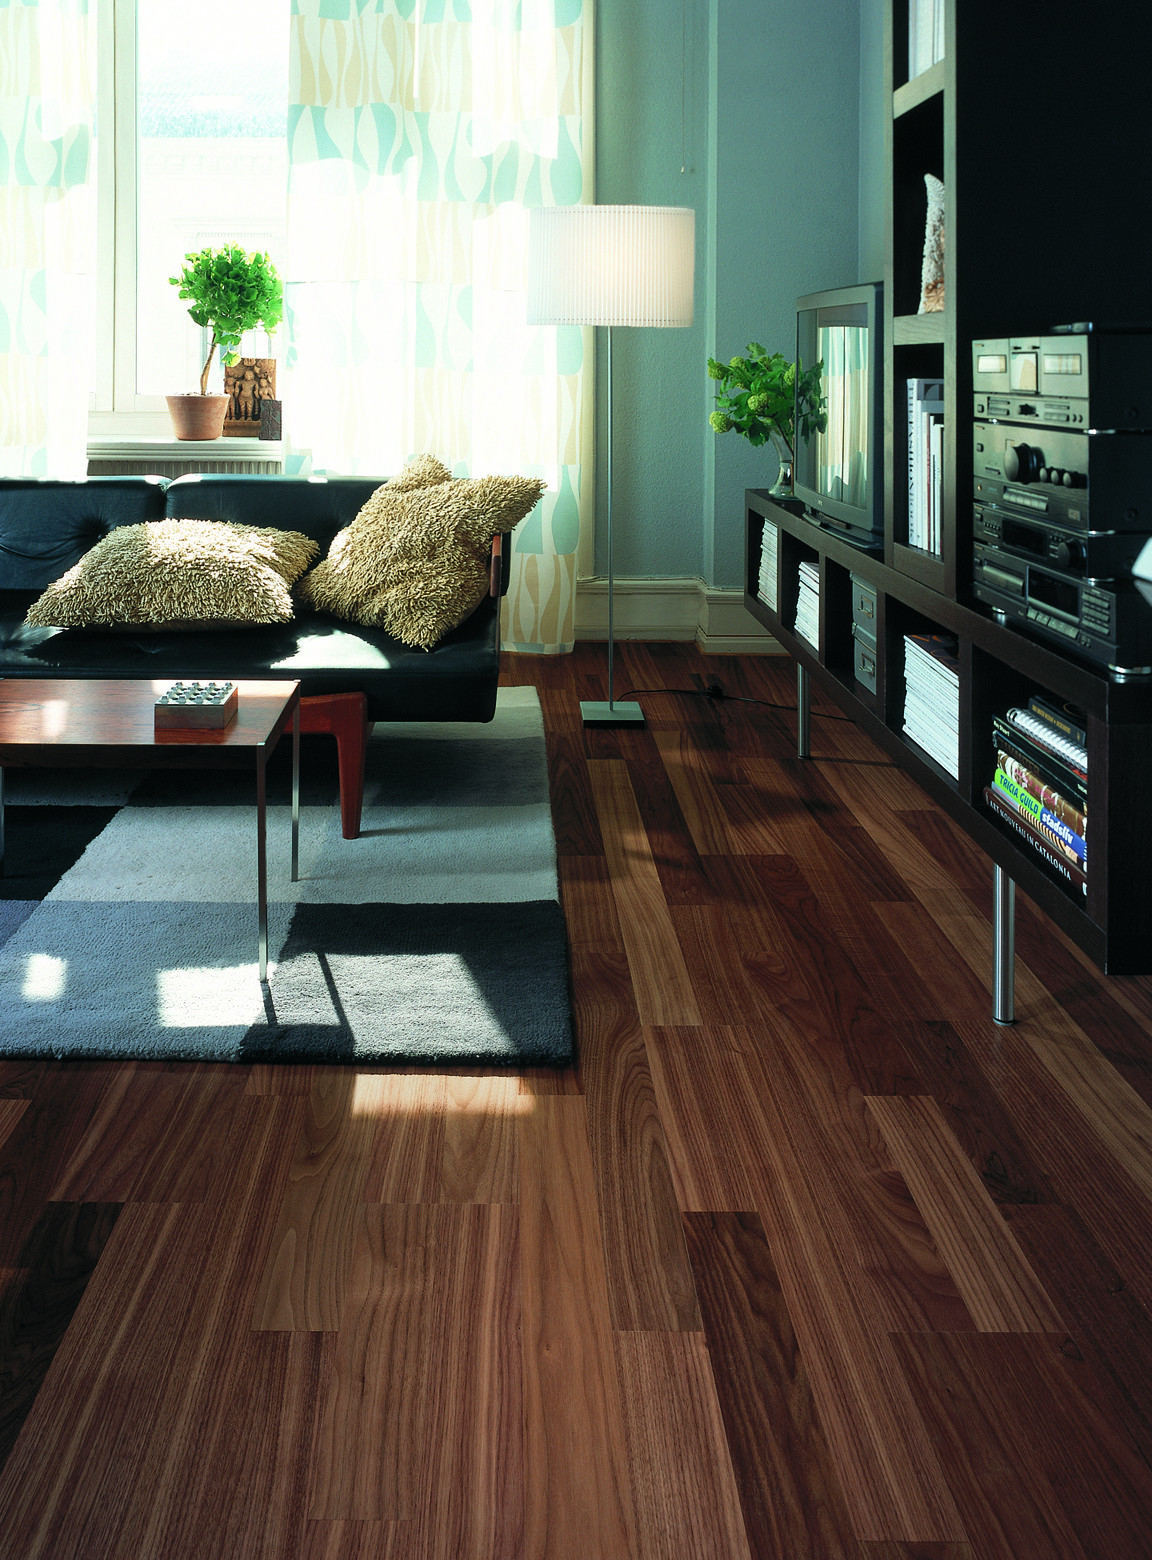 25 Trendy Cheap Engineered Hardwood Flooring toronto 2024 free download cheap engineered hardwood flooring toronto of relaxing living area hardwood floors pinterest with podlahy podlahova krytiny a parkety od vac2bdhradnac2adho dovozce find this pin and more on 